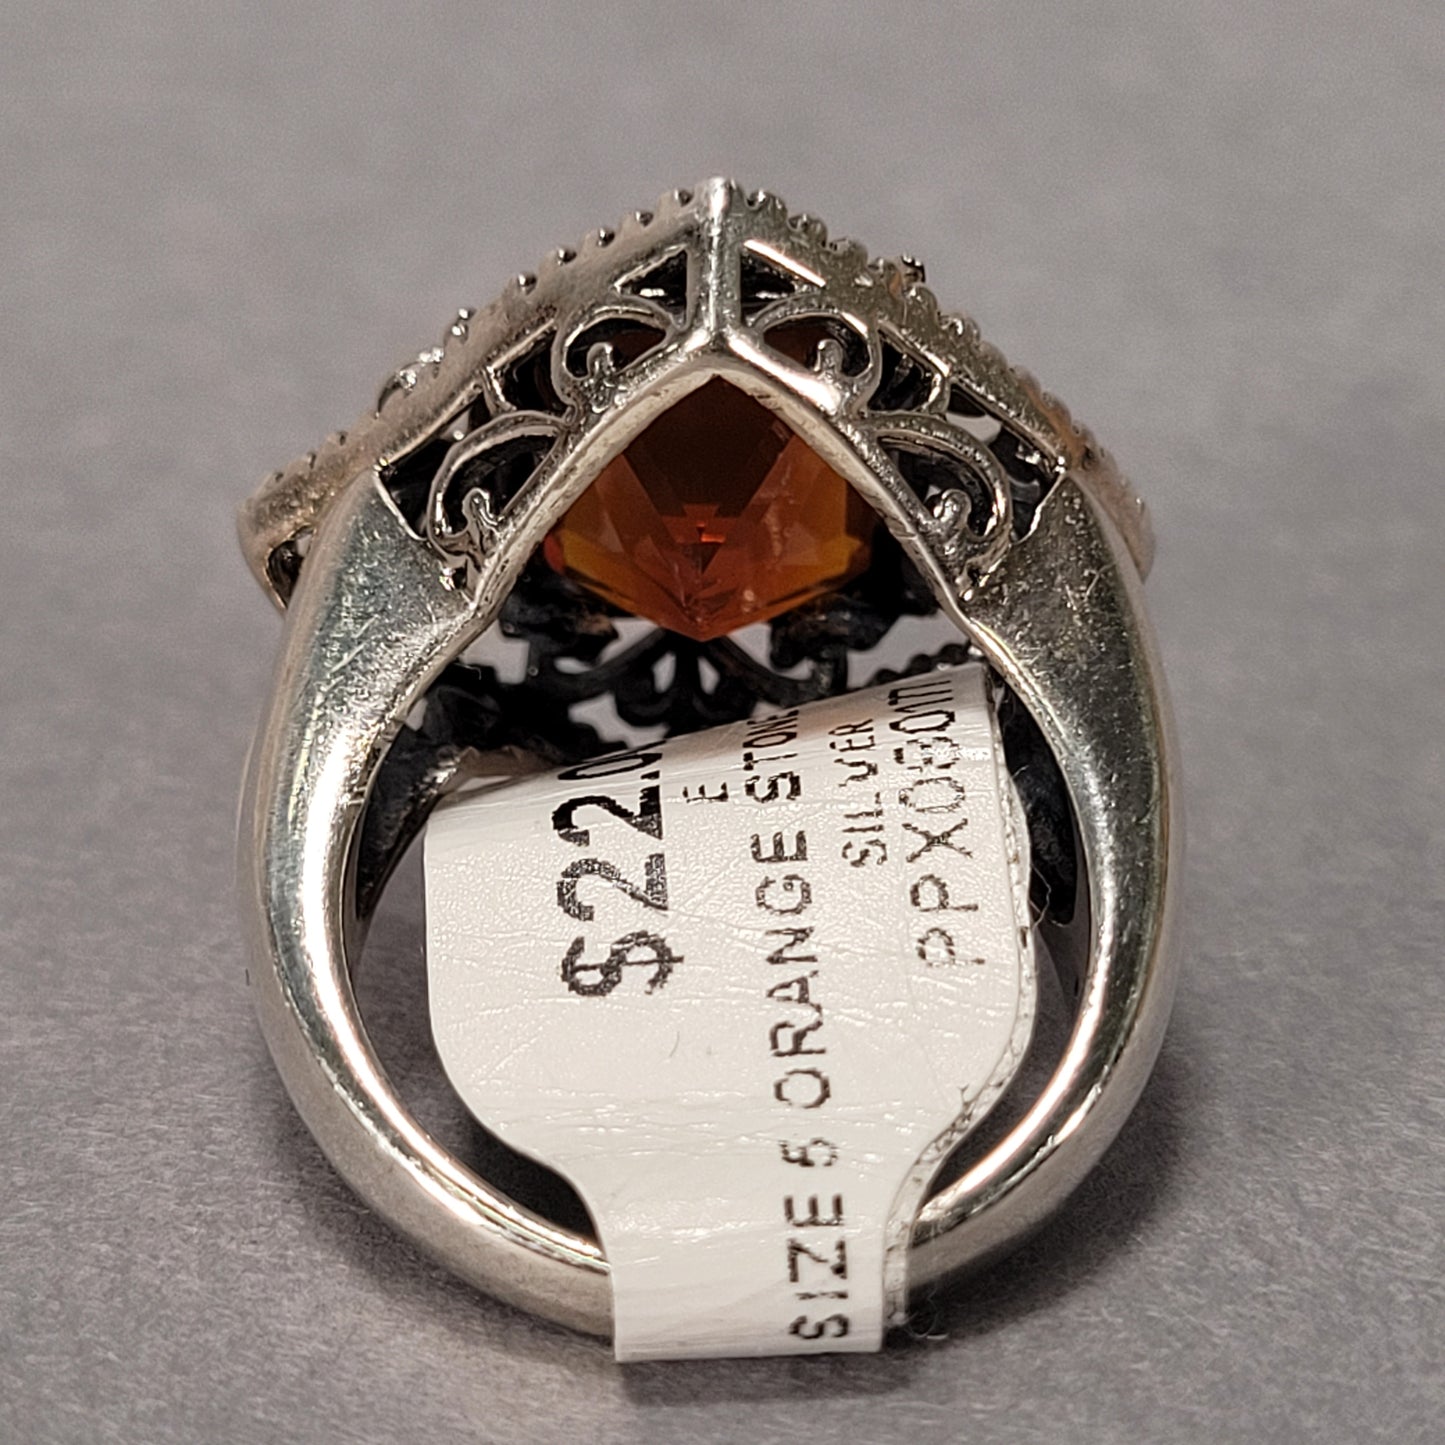 Sterling Silver Ring With Orange Stone